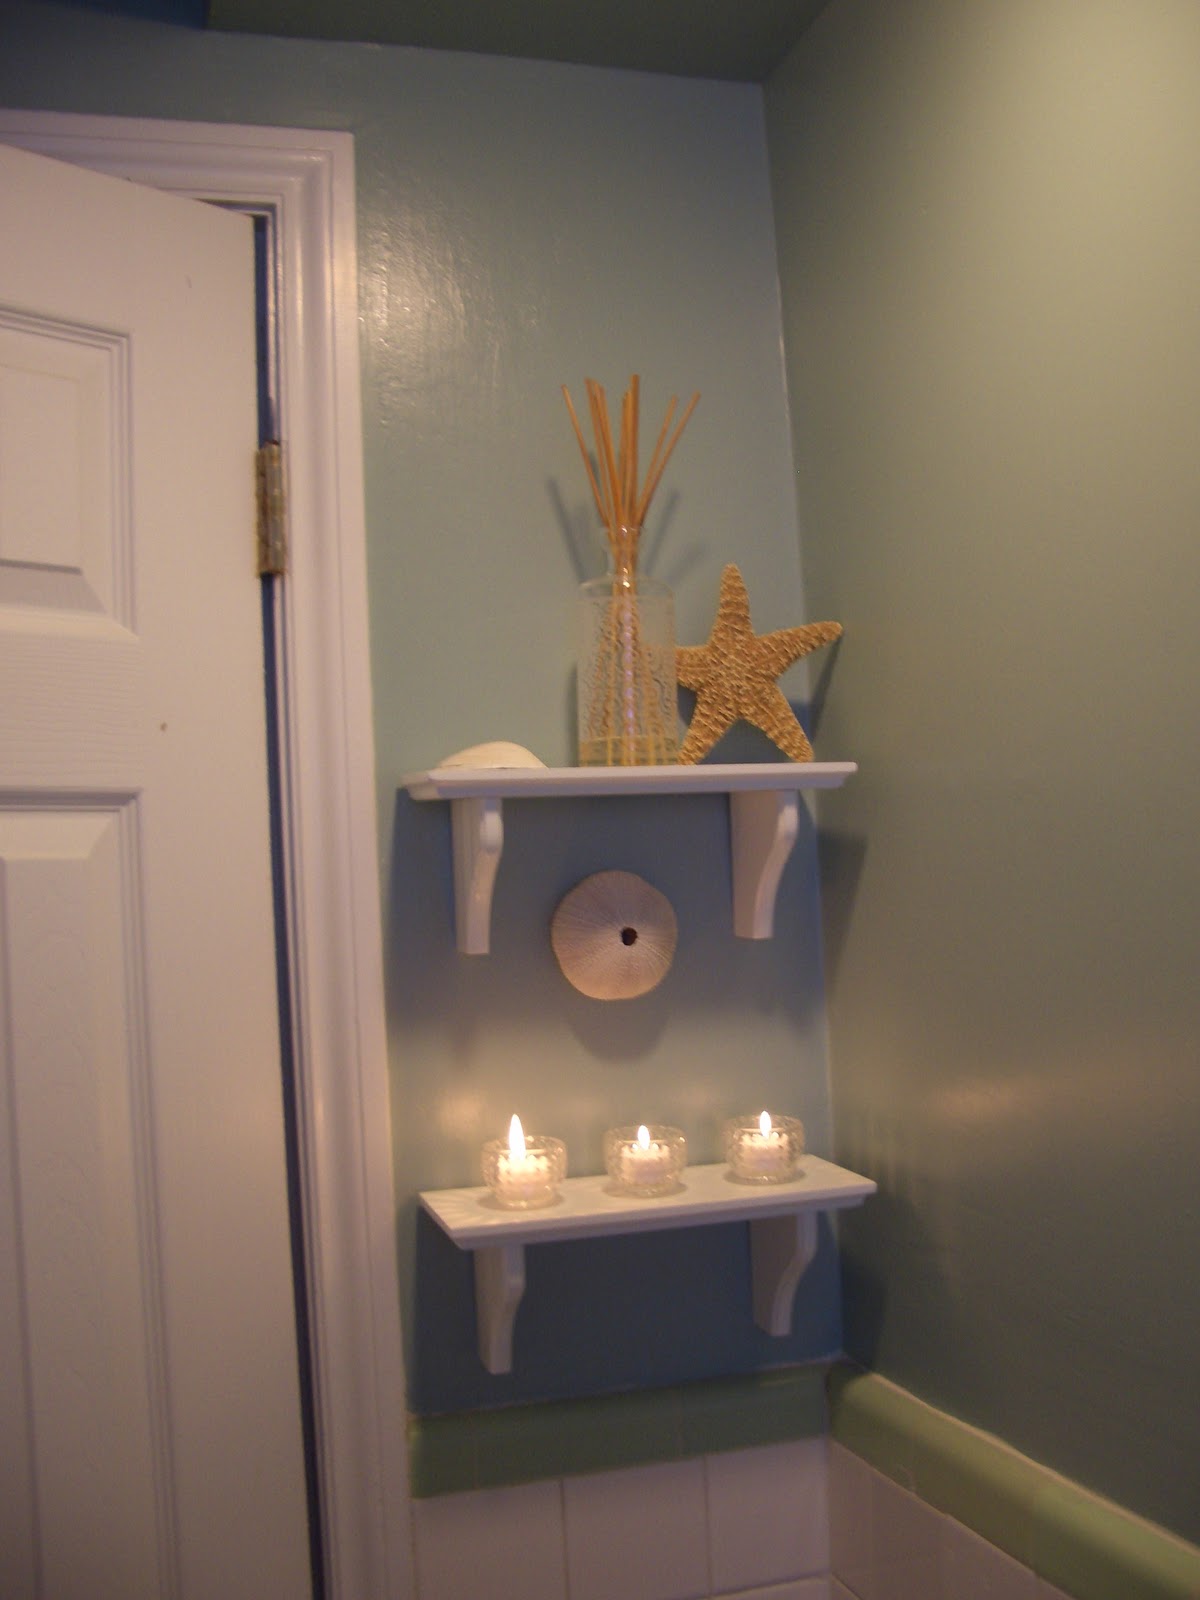 Cool Home Creations: Wall Decor: Bathroom Shelves on What To Put On Decorative Wall Sconces Shelves id=38920